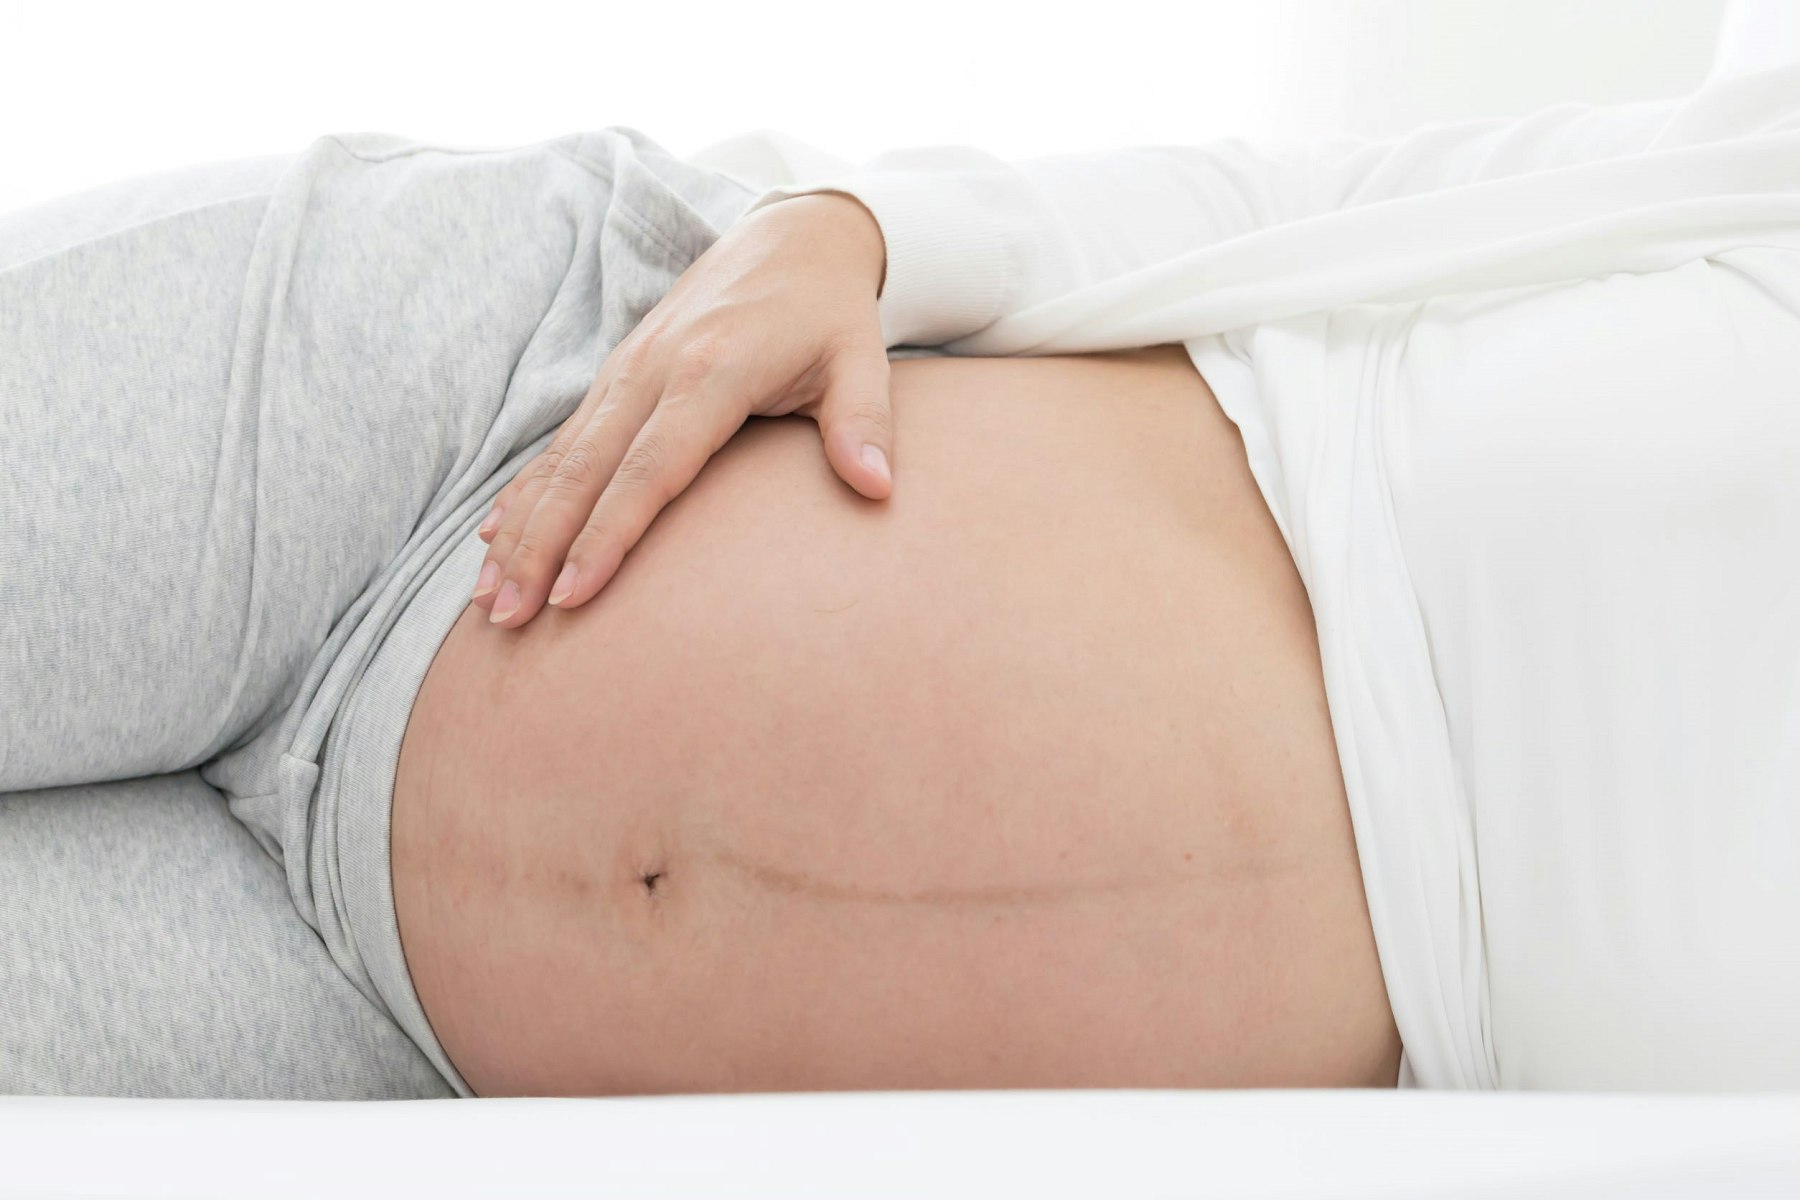 What is the Linea Nigra – the dark line on my pregnant belly?